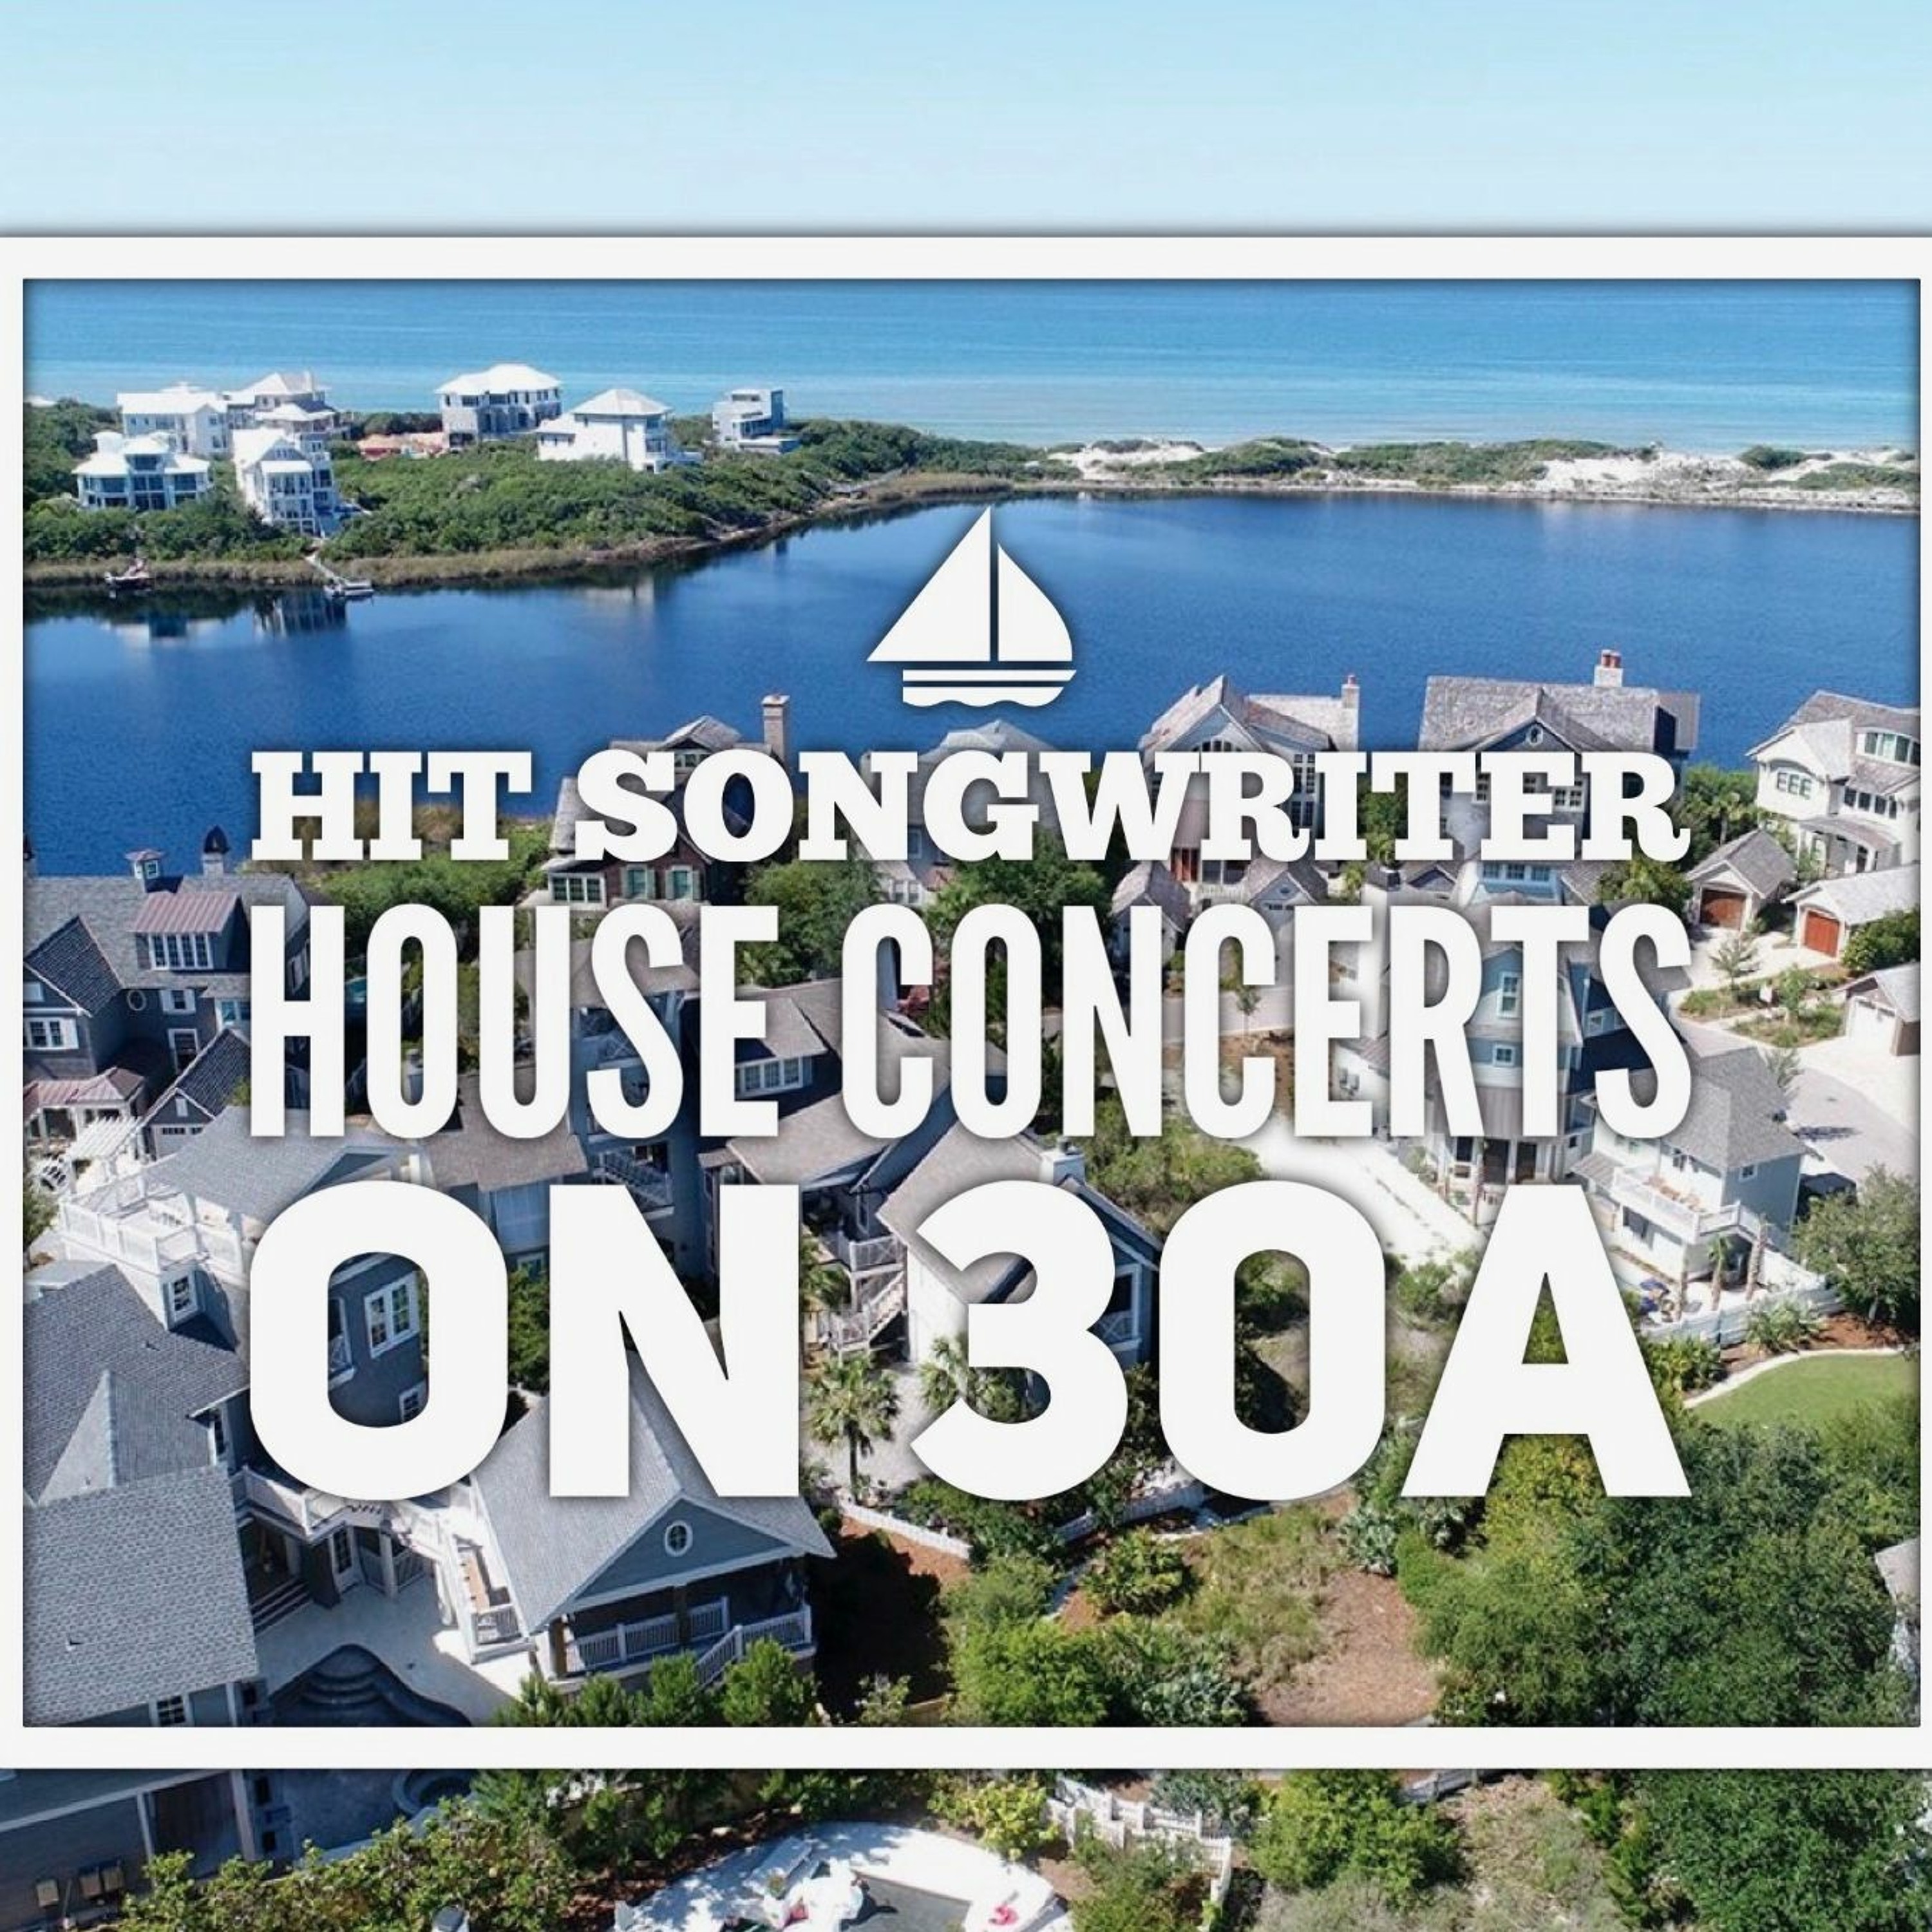 30A Show Hit Songwriter House Concerts